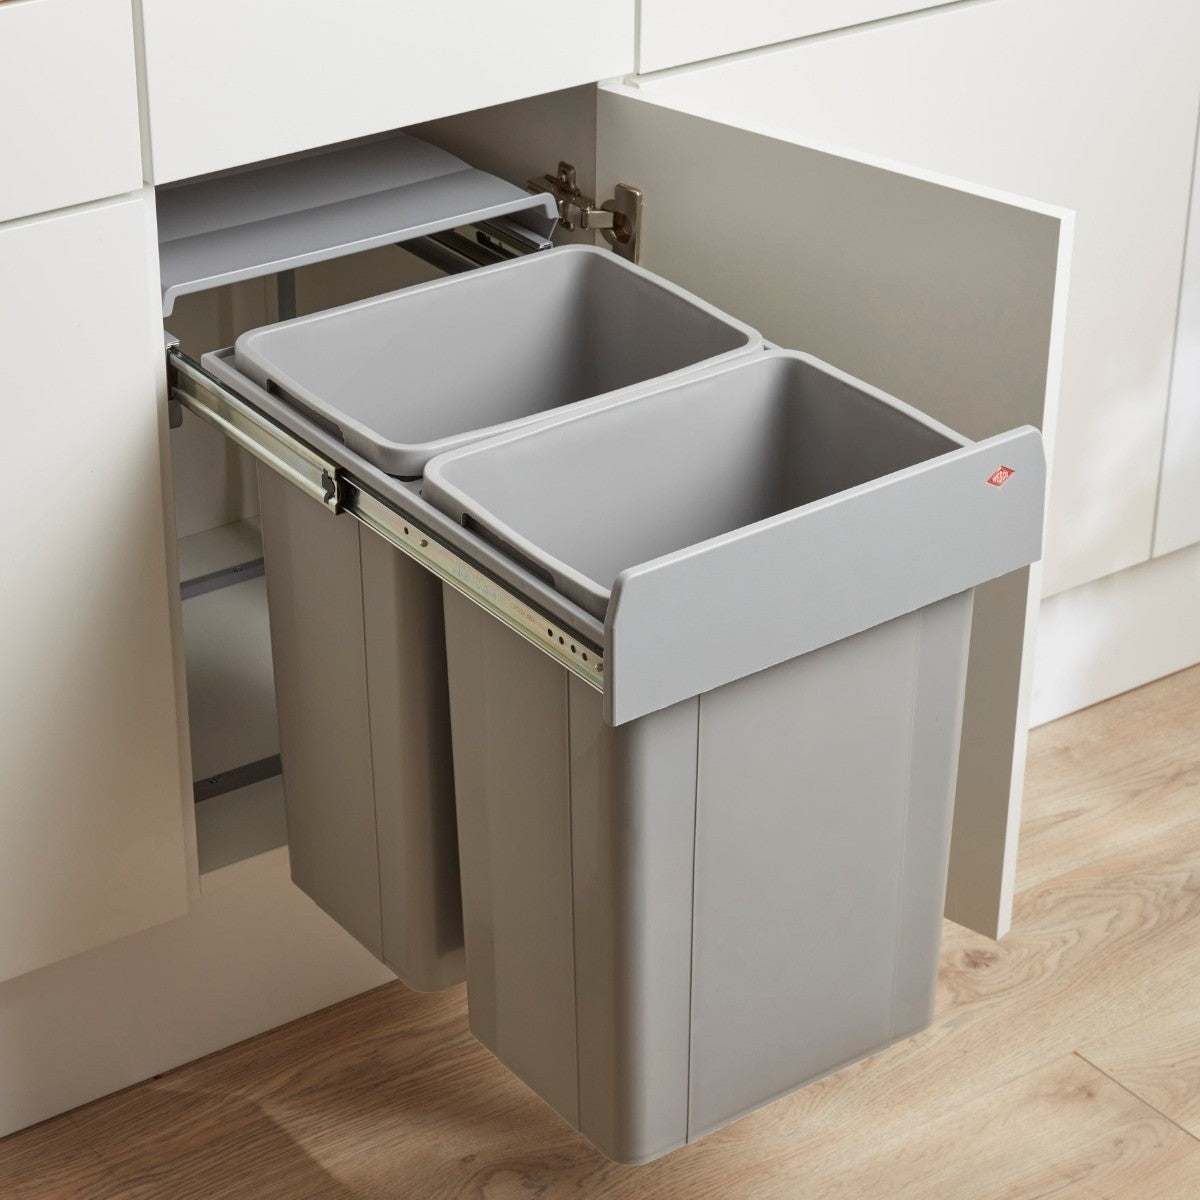 Wesco Big Bio 2 Compartment 52 litre in-cupboard kitchen recycling bin for 400mm wide hinged door cabinet 757WS811-85